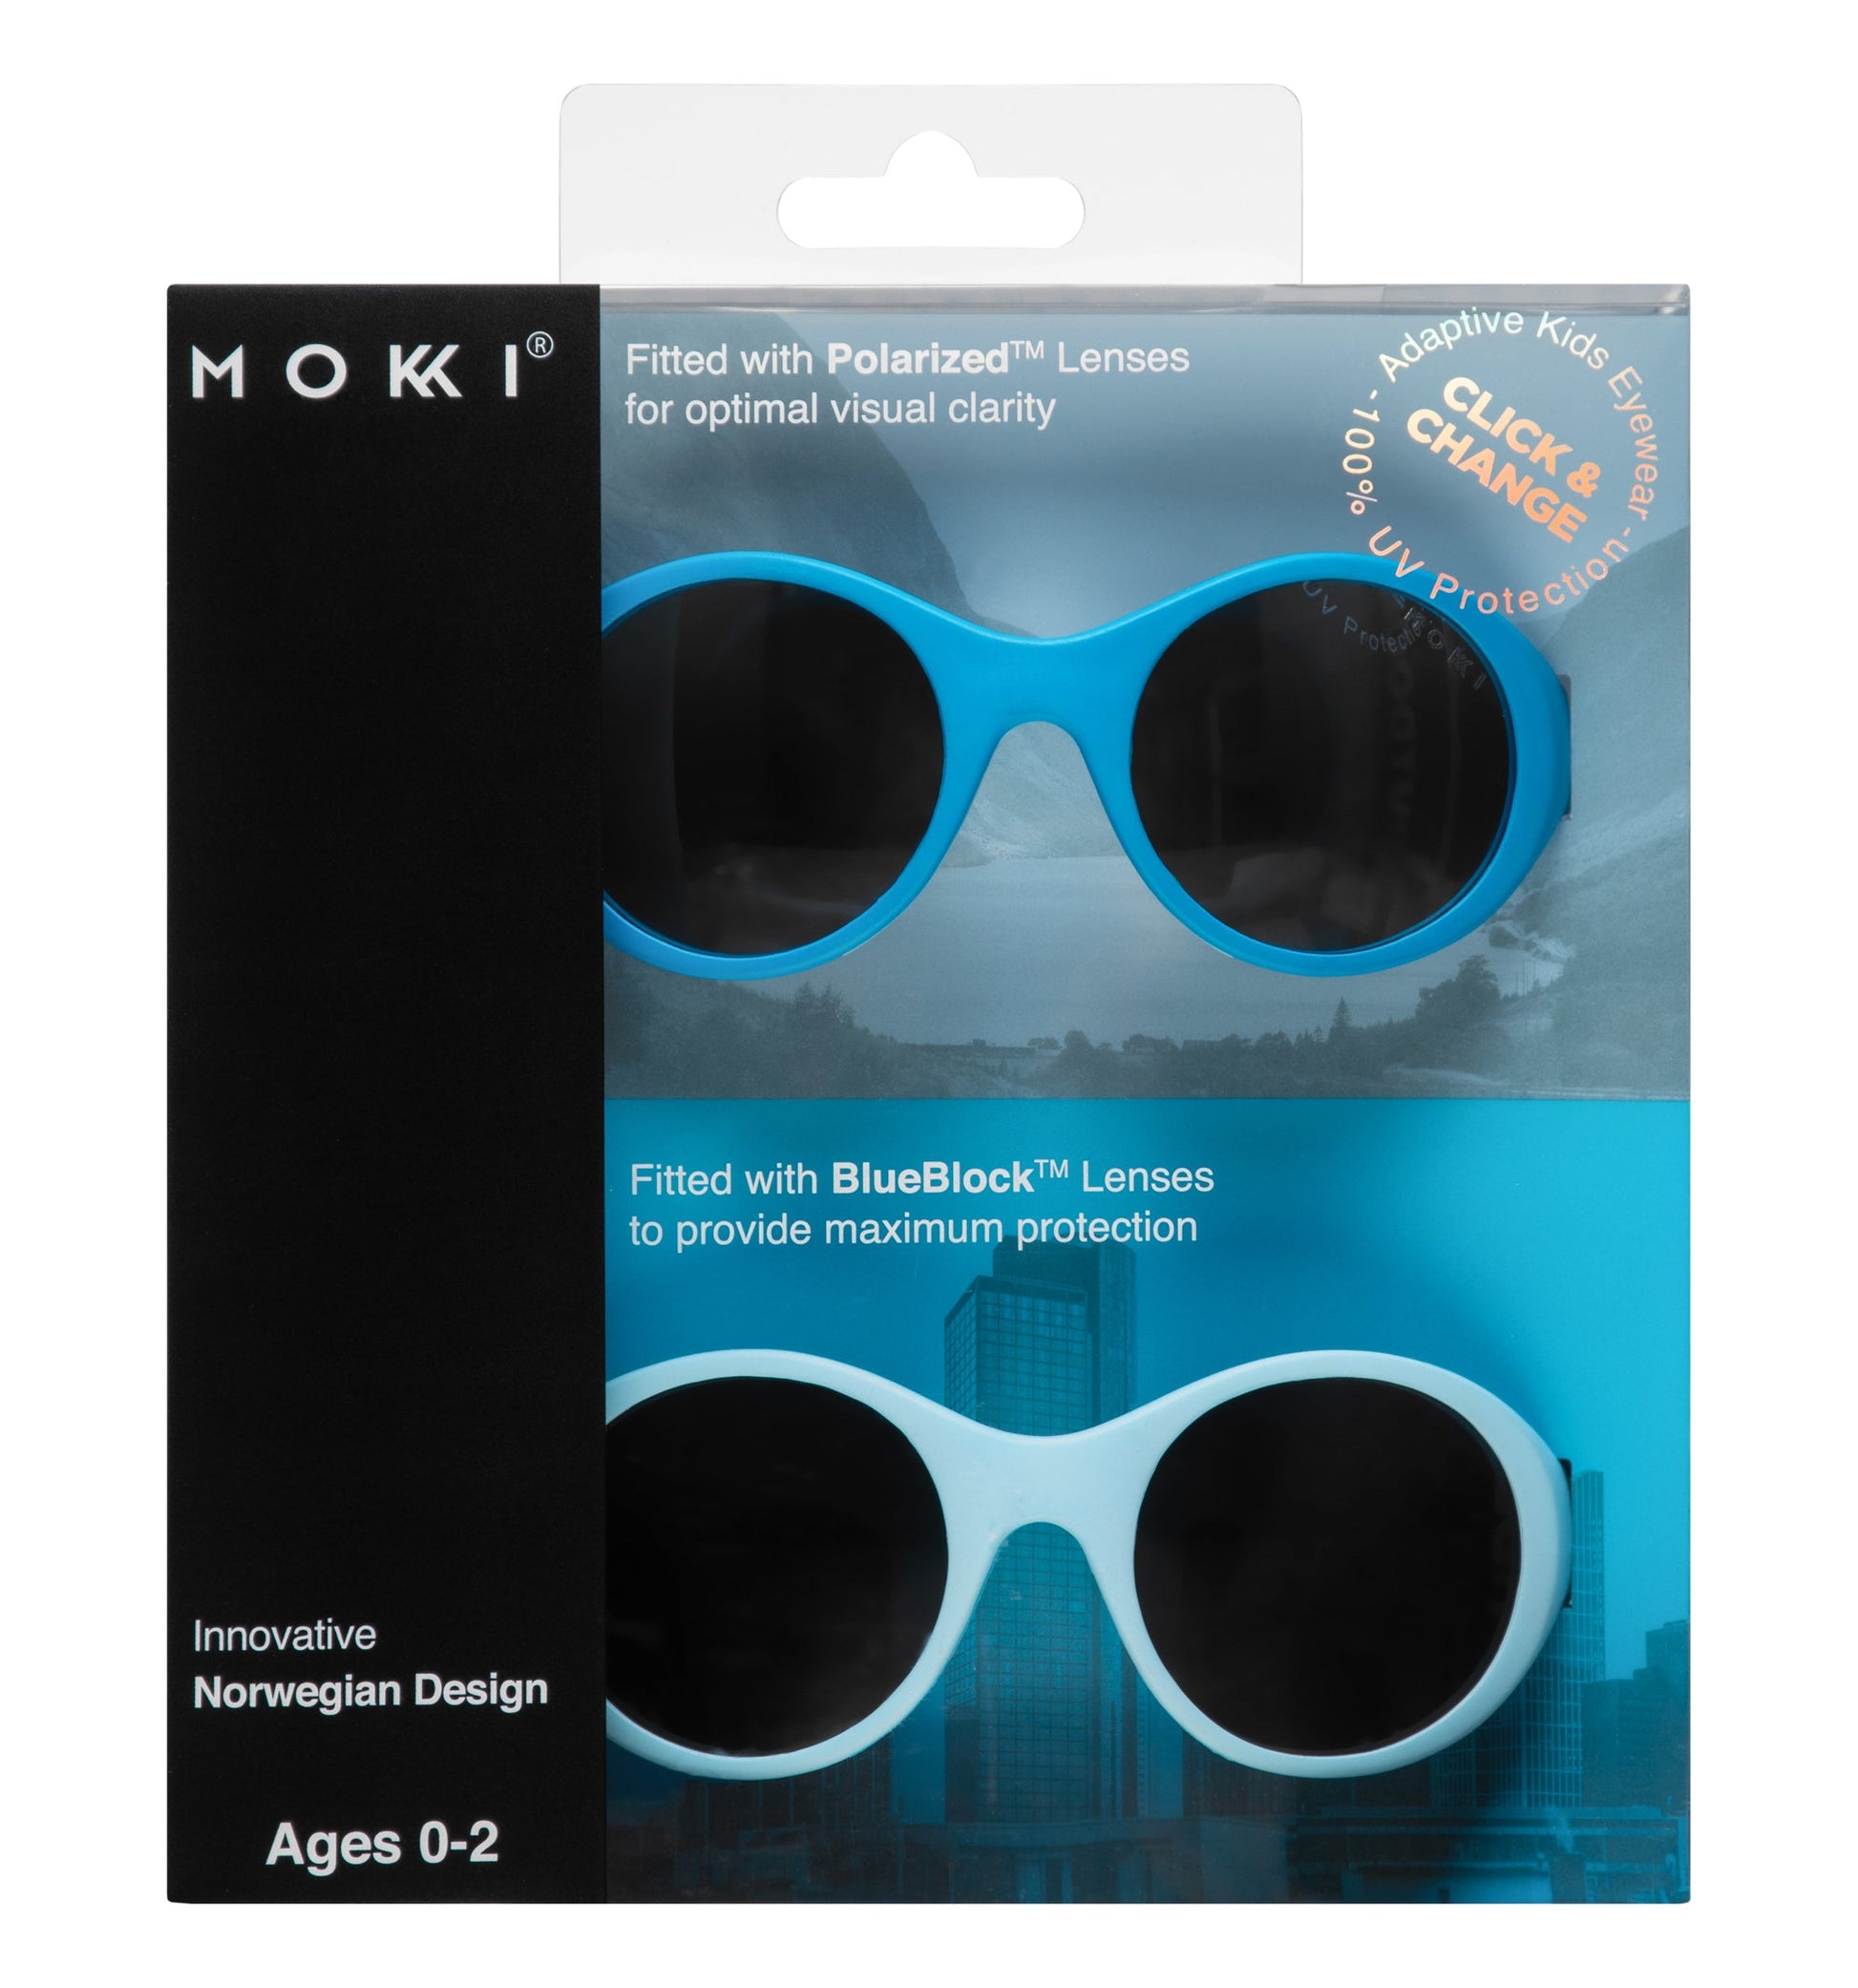 Mokki Click & Change-sunglasses for kids ages 0-2 in blue